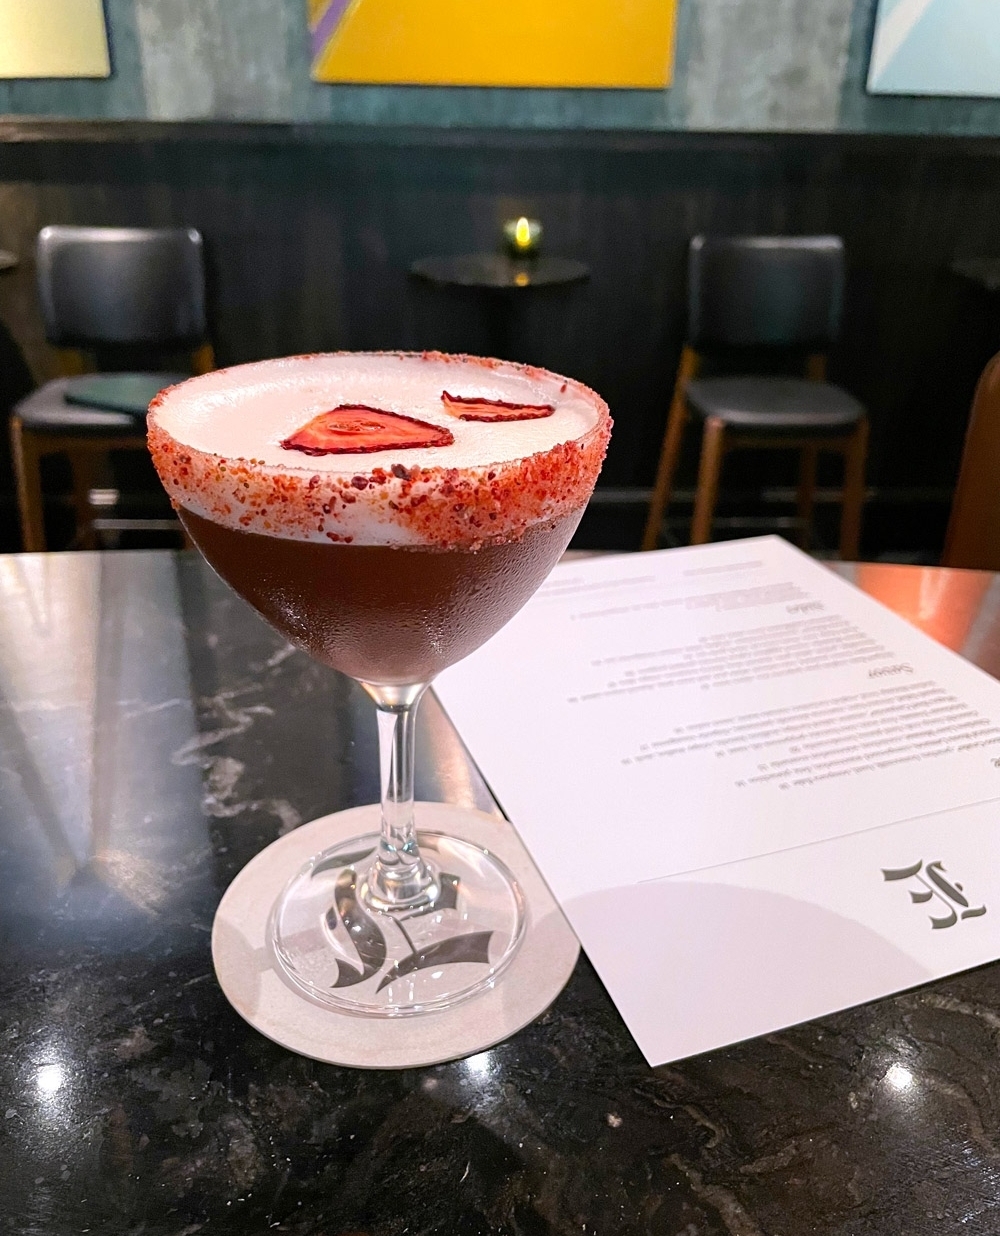 Don't forget that it's the weekend and we have happy hour - so come have a cocktail! New to the menu today is the Strawberry Feelz, made with Mezcal, eggwhites, Montenegro Amaro, and lime for only $10!⁠
<br/>
<br/>
<br/>
#strawberry #summertime #southofbroad #happyhour #cocktails #charleston